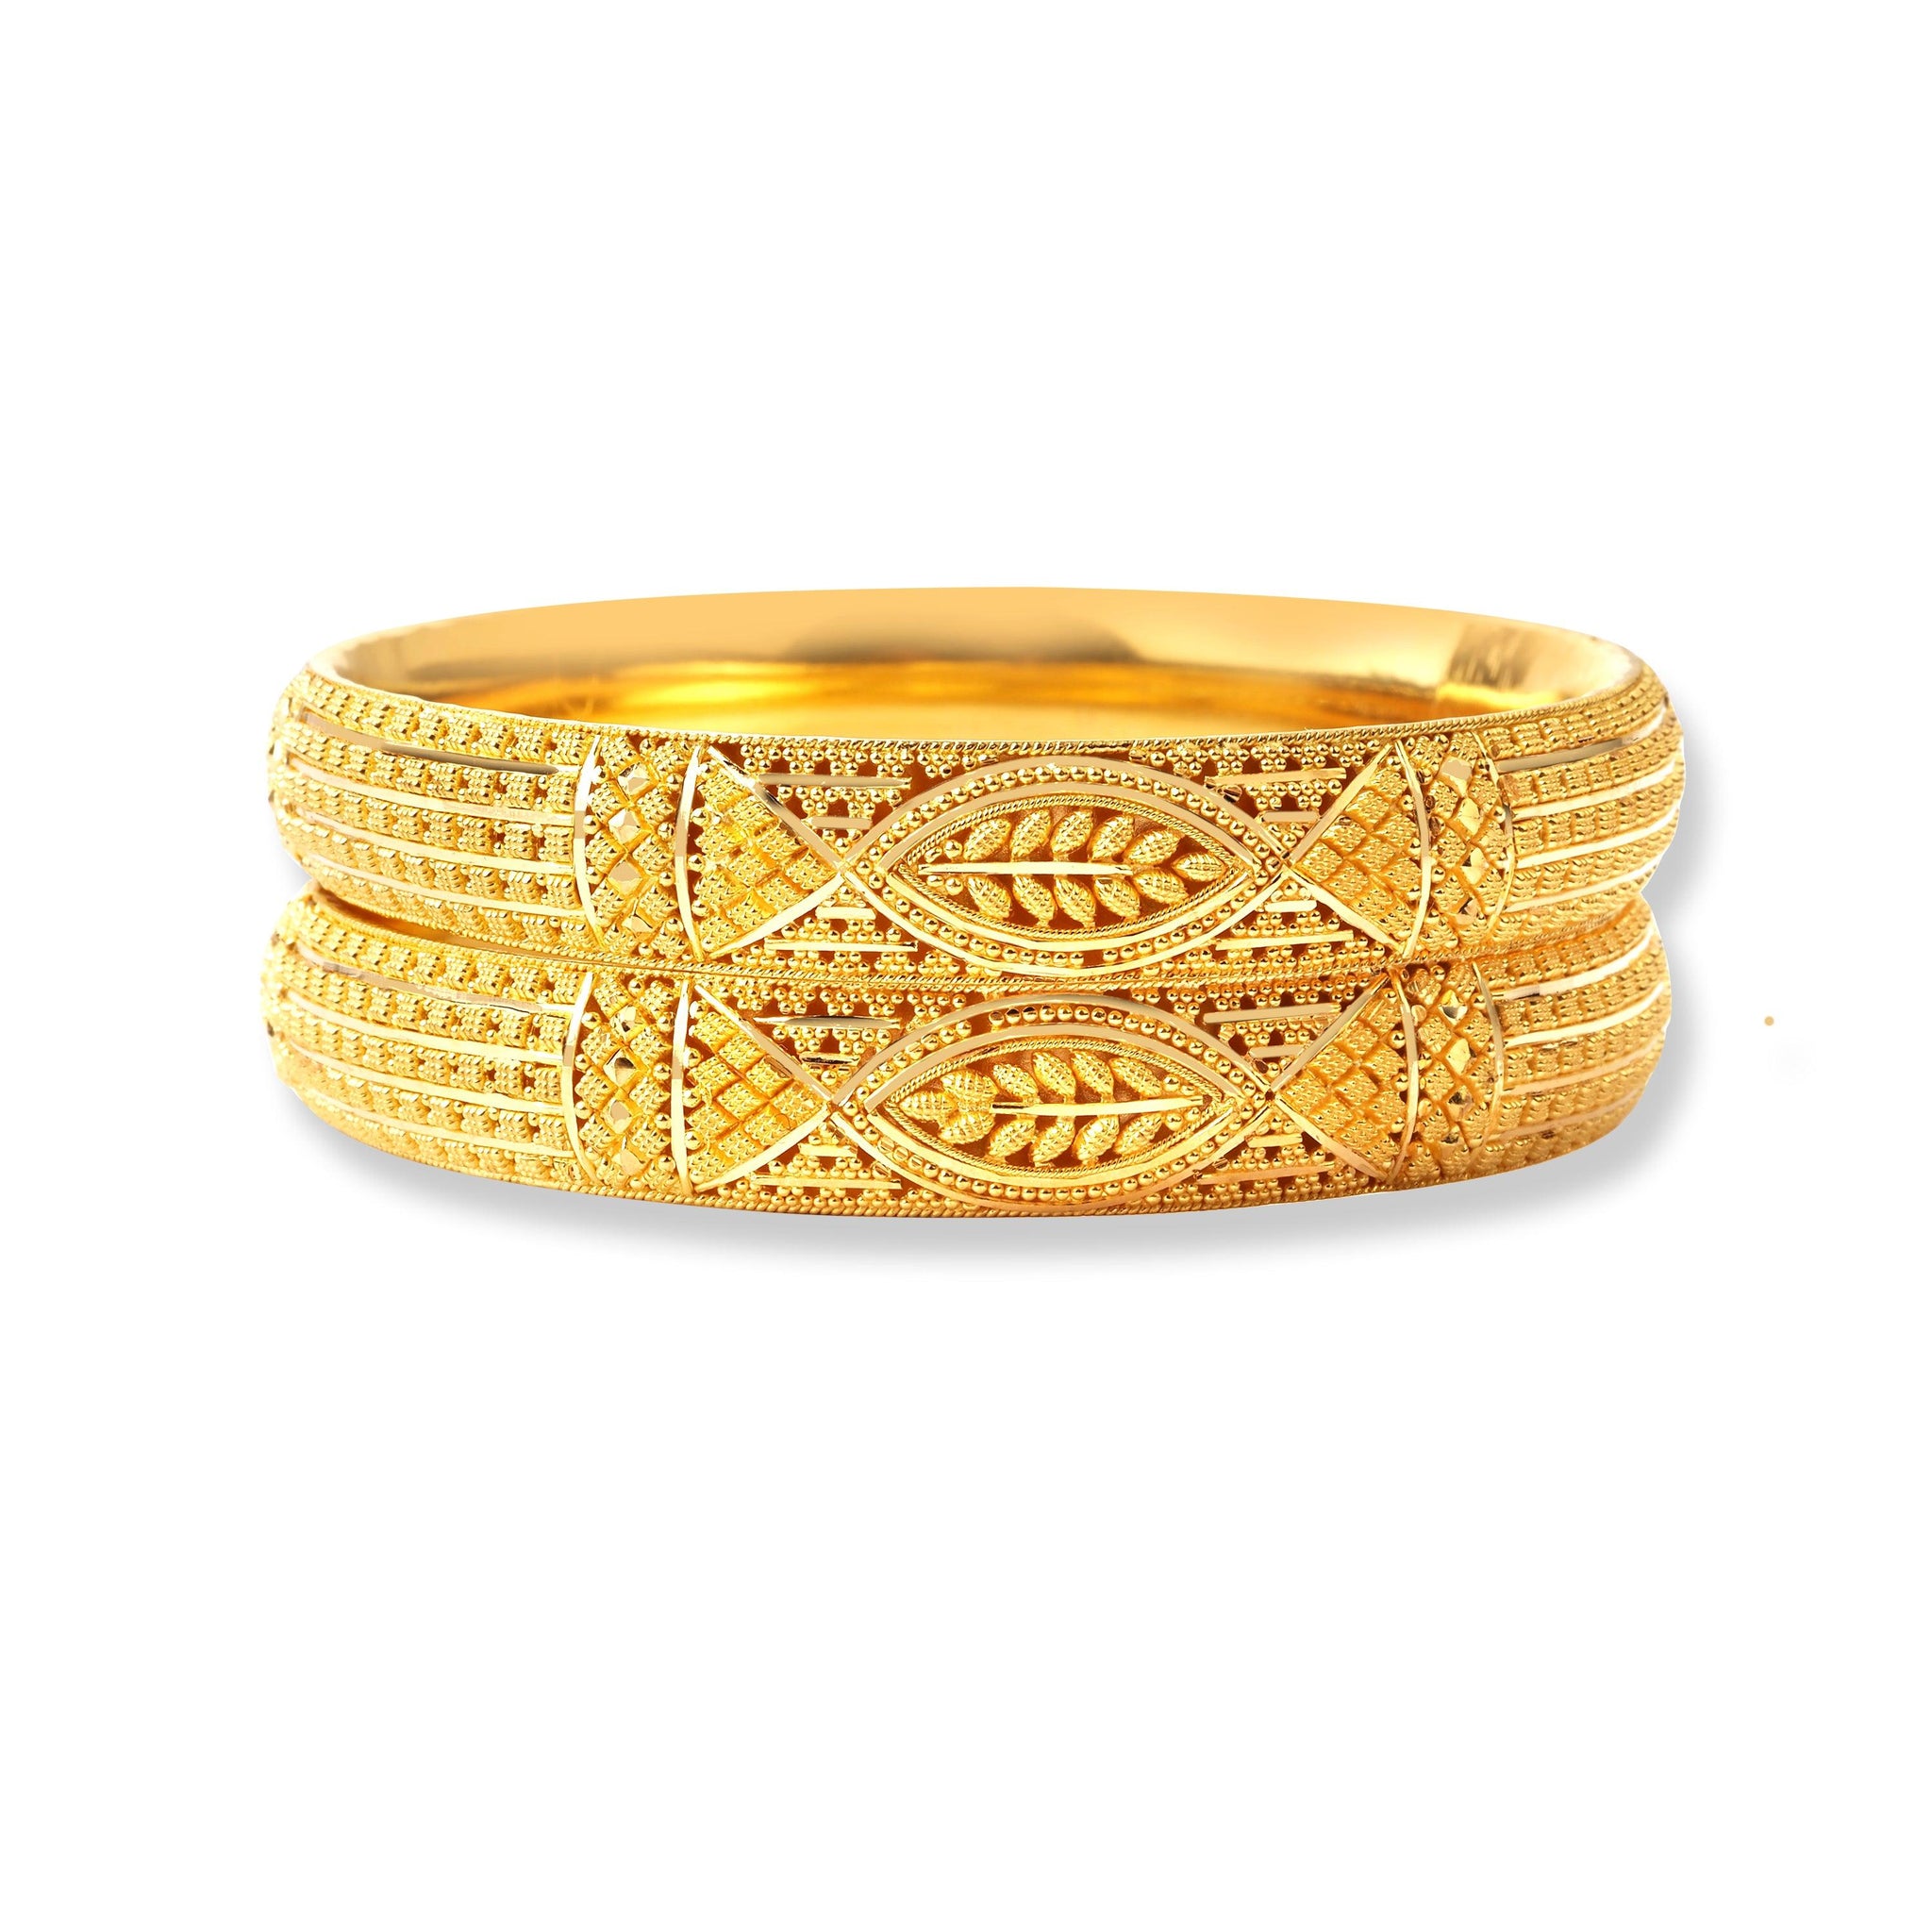 Set of Two 22ct Bangles with Flower Pattern & Filigree work Design in Comfort fit Finish (52.02g) B-8506